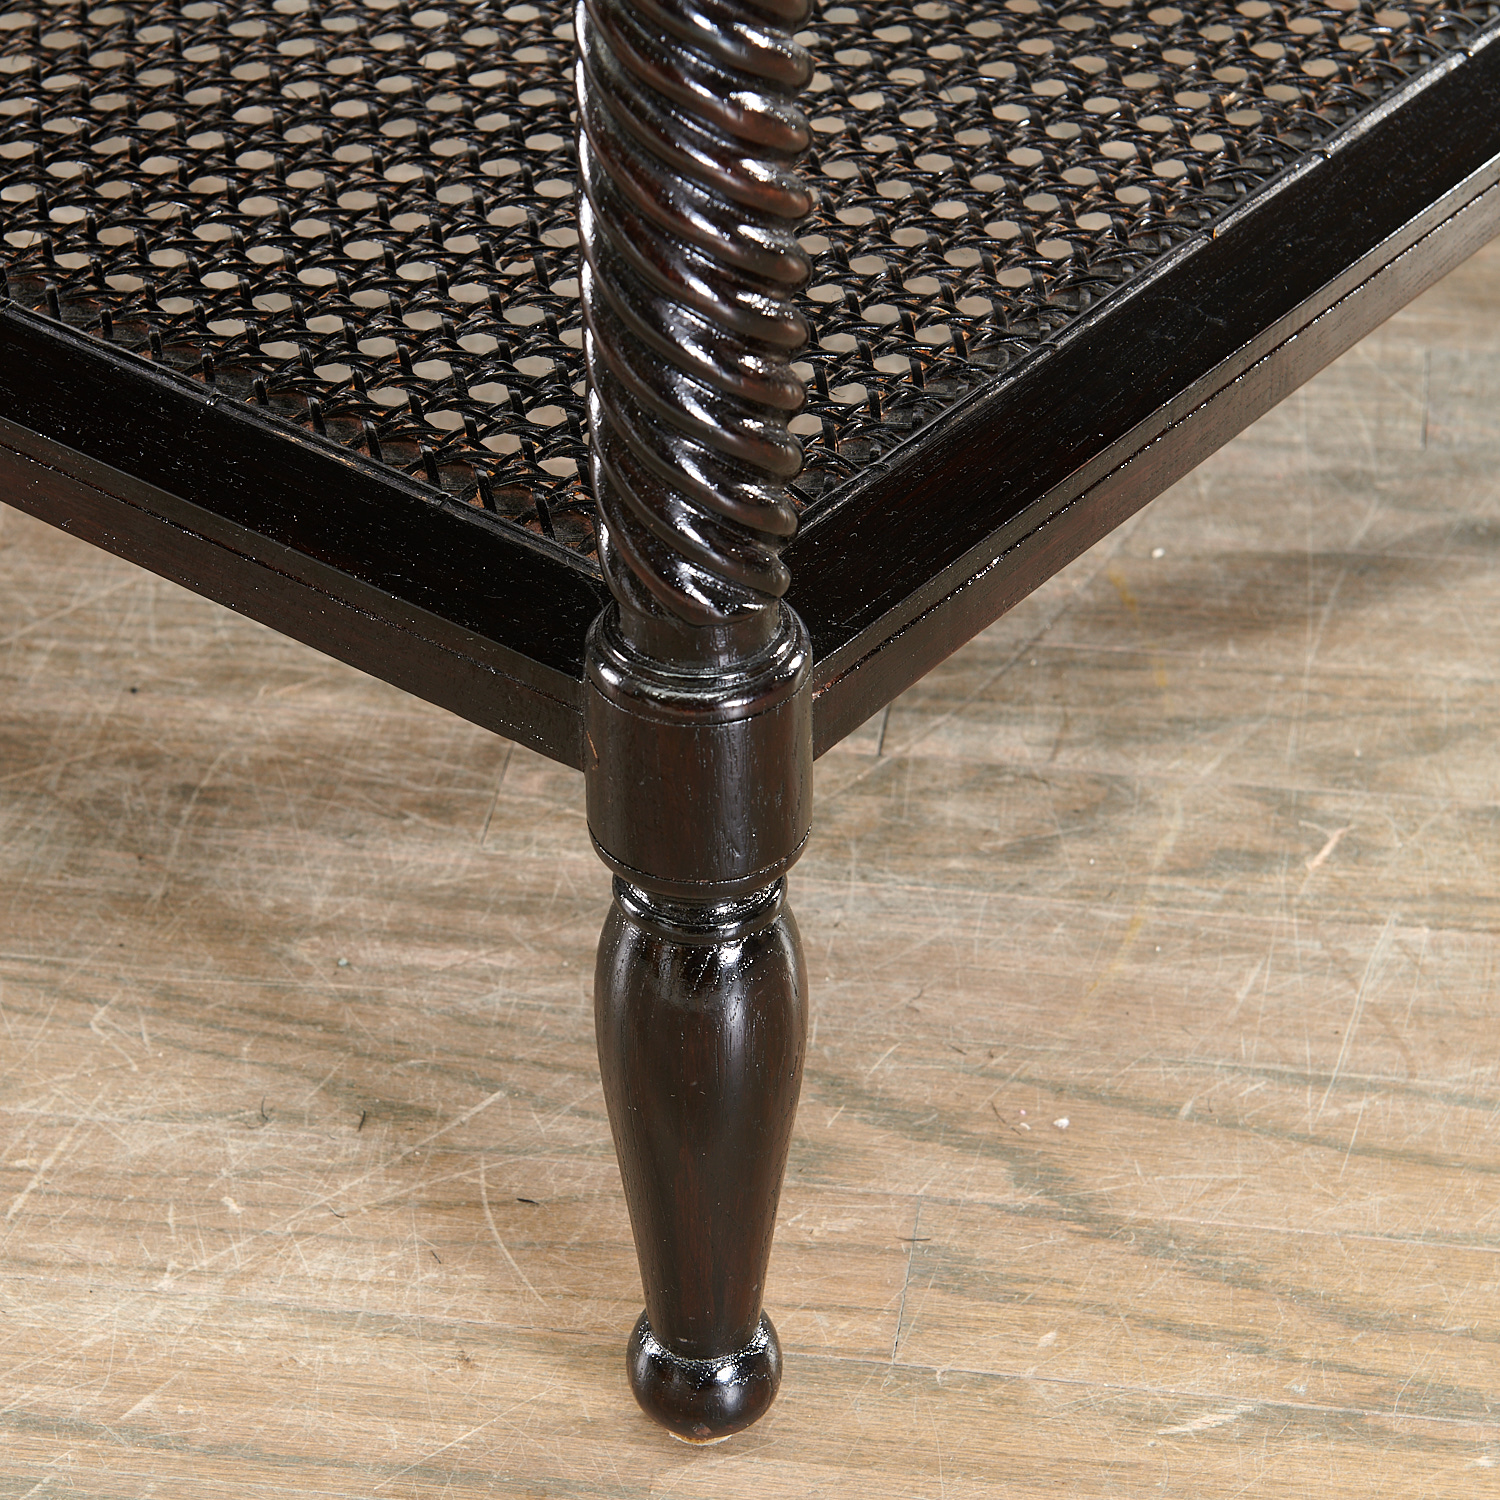 Peter Marino Anglo-Indian style occasional table - Image 3 of 9